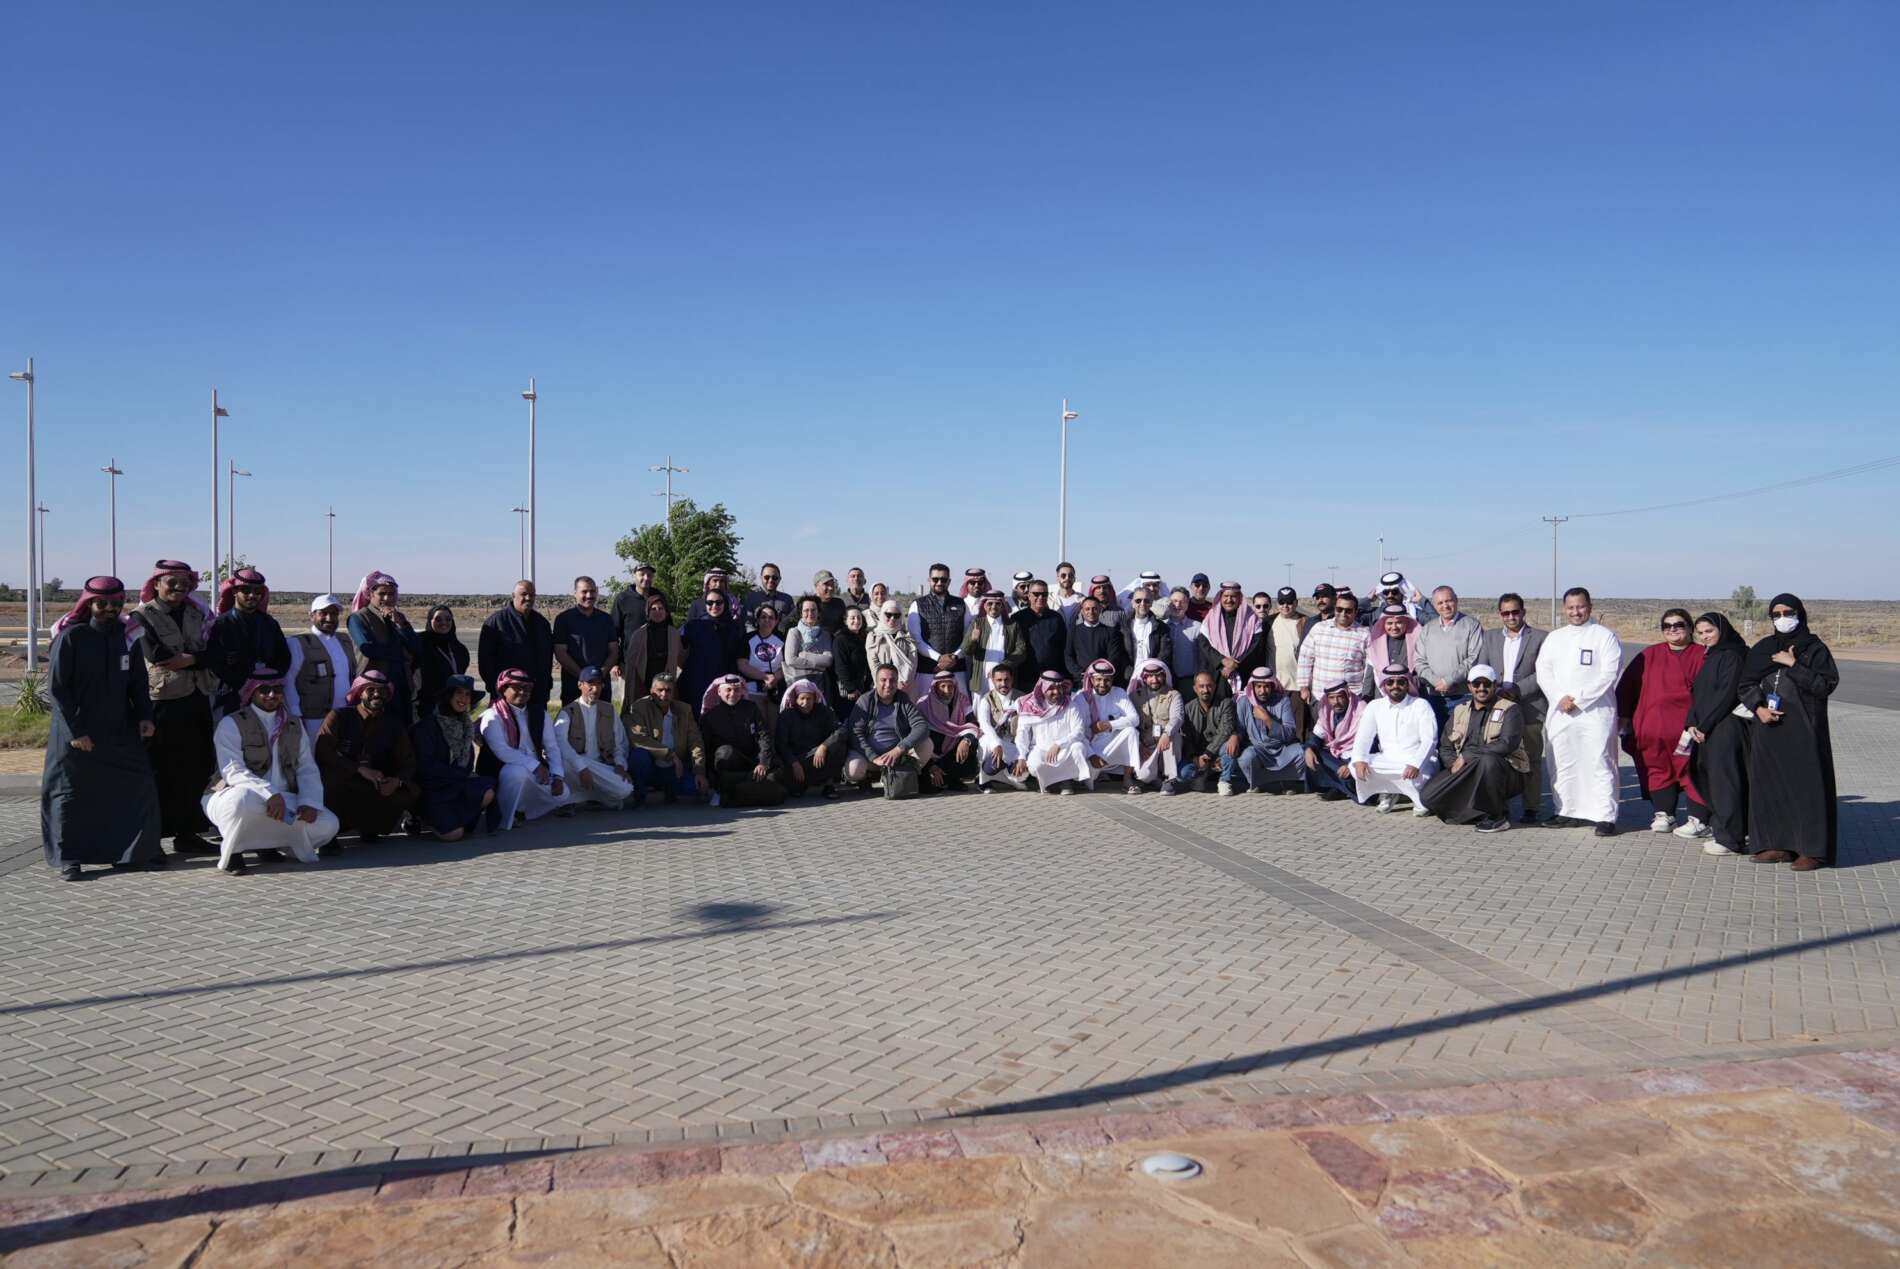 The fourth workshop of the programme ” Preparation of a Site Management Plan for the Transnational Property of Darb Zubaydah” concluded through international collaboration